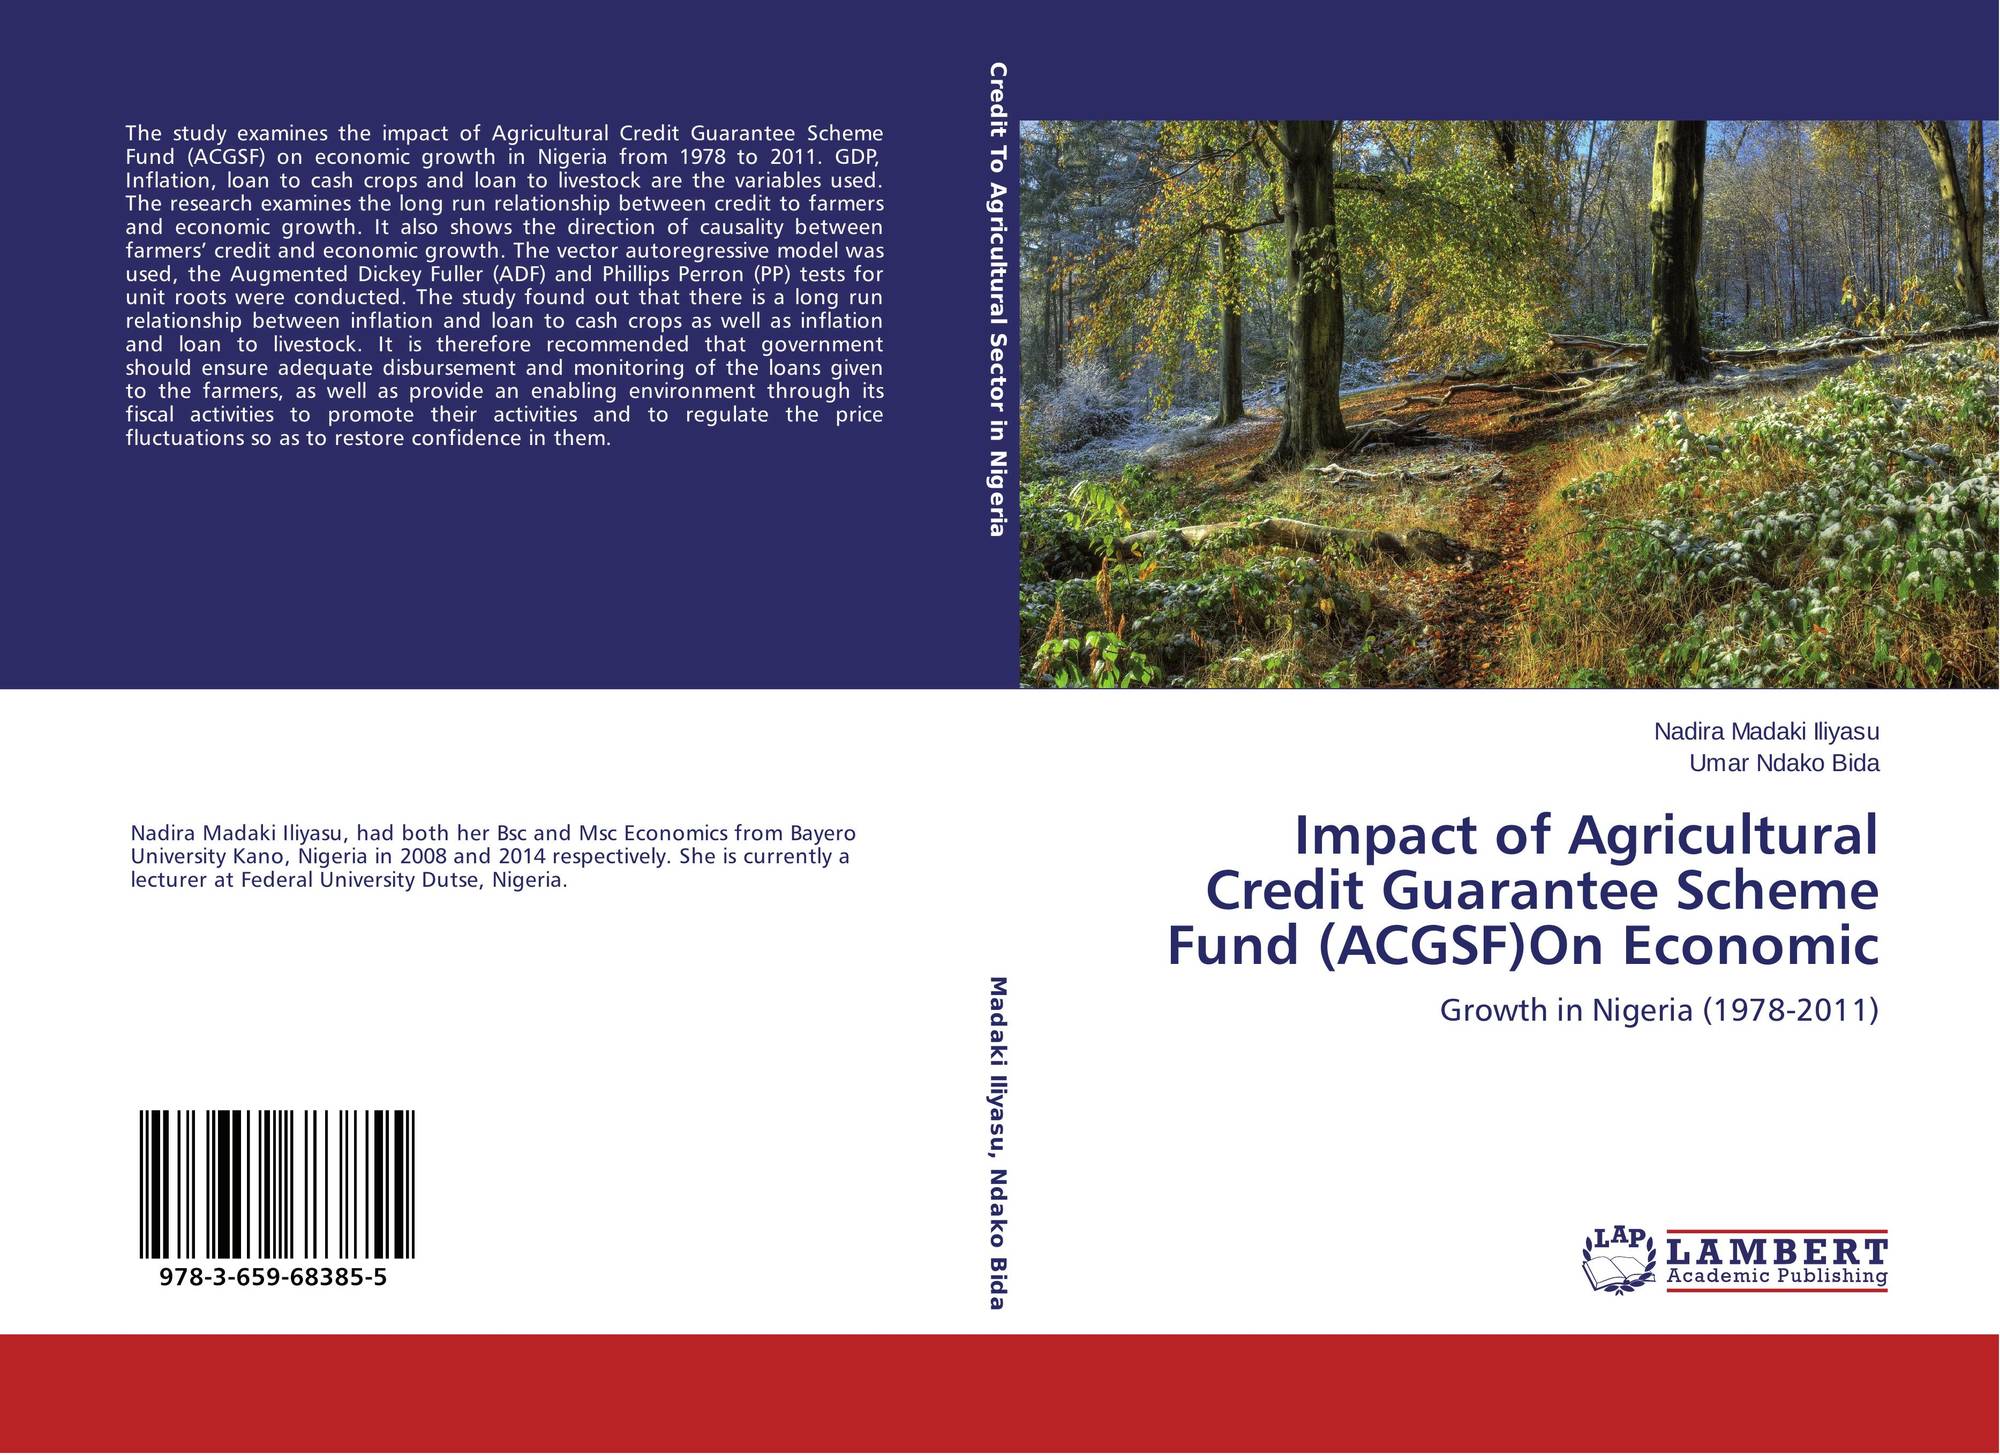 case study on agricultural credit guarantee scheme fund